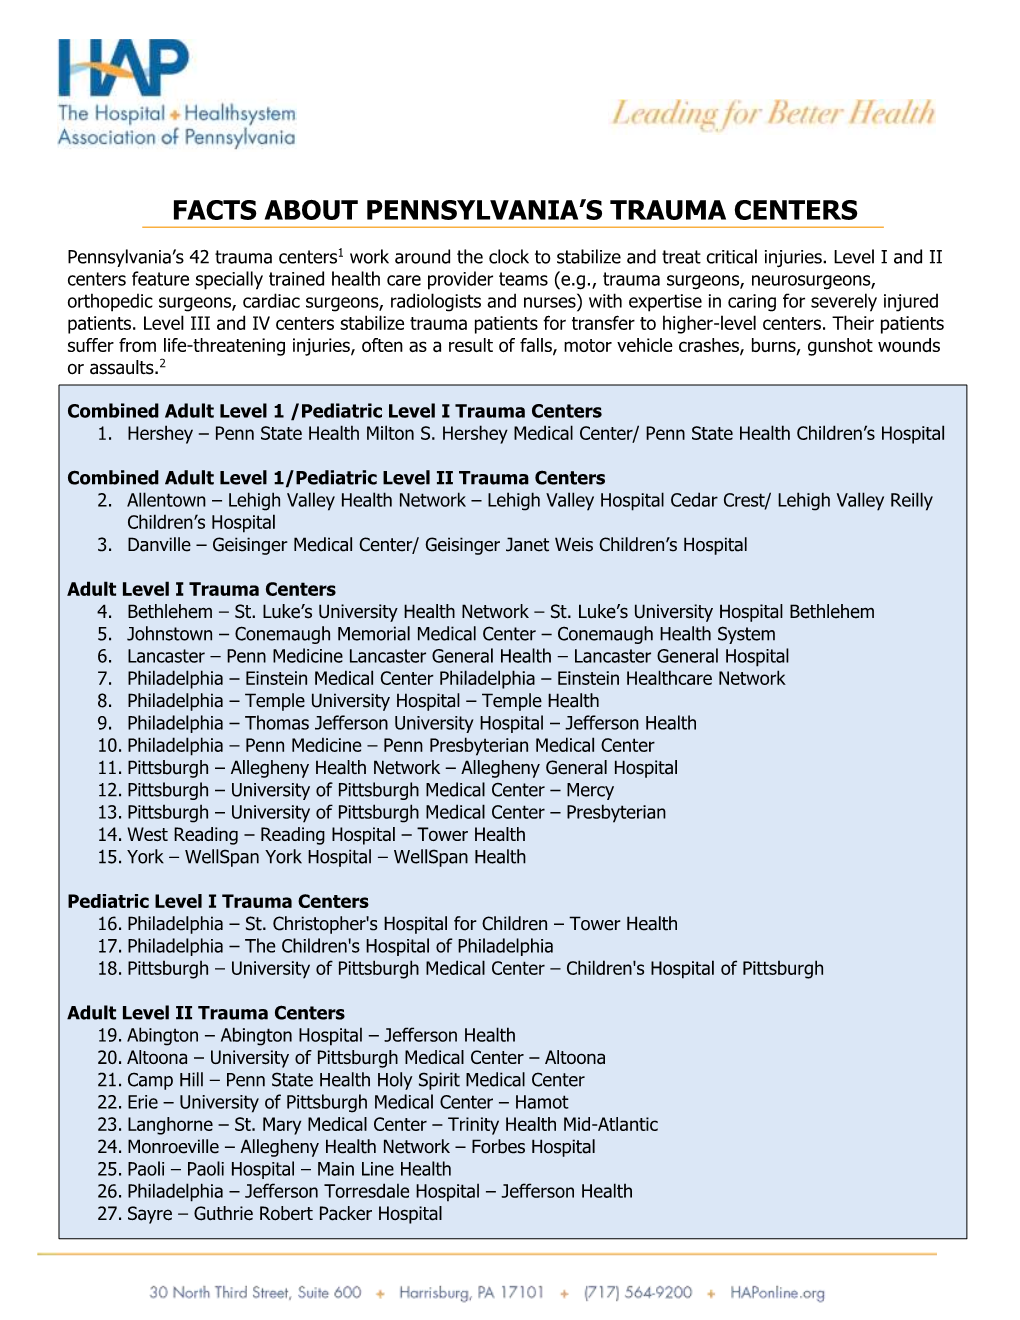 Facts About Pennsylvania's Trauma Centers